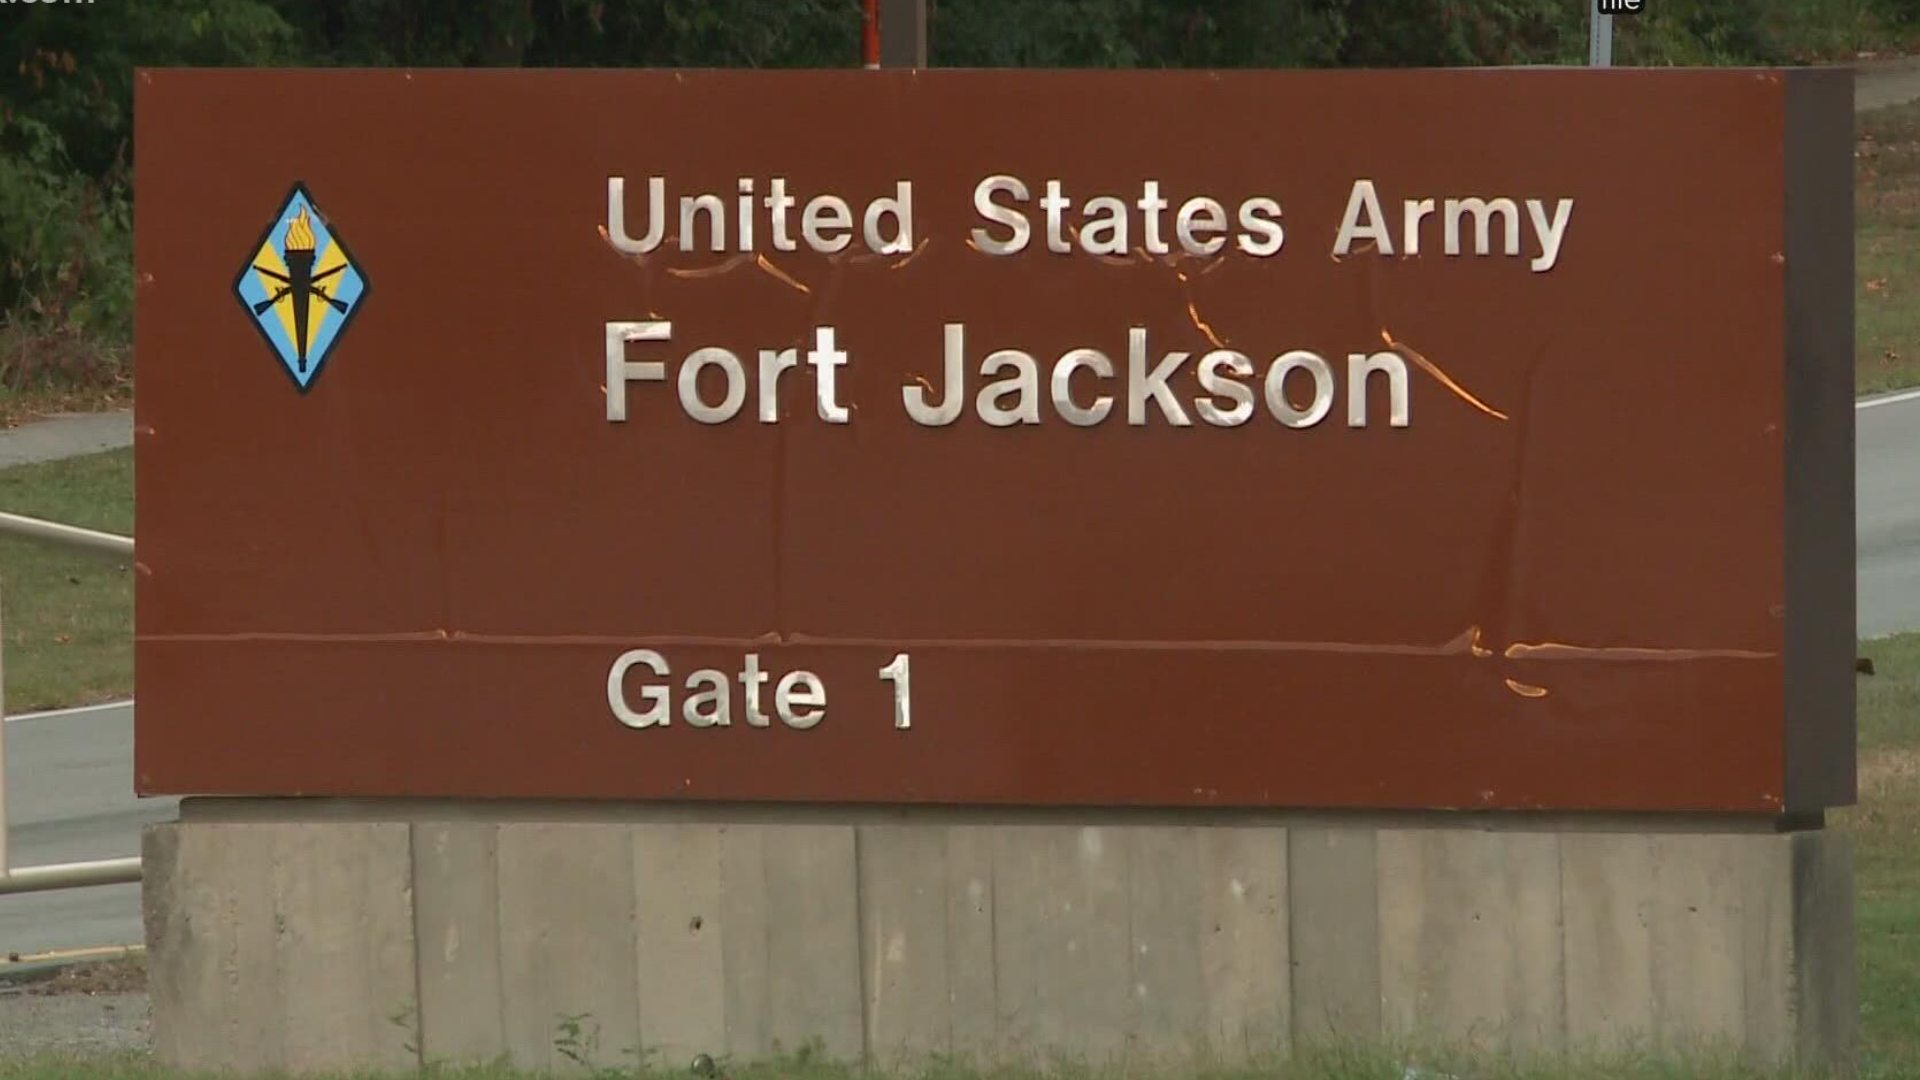 A soldier trainee has died after being found unresponsive at Fort Jackson, leading to a 48-hour training stand-down.